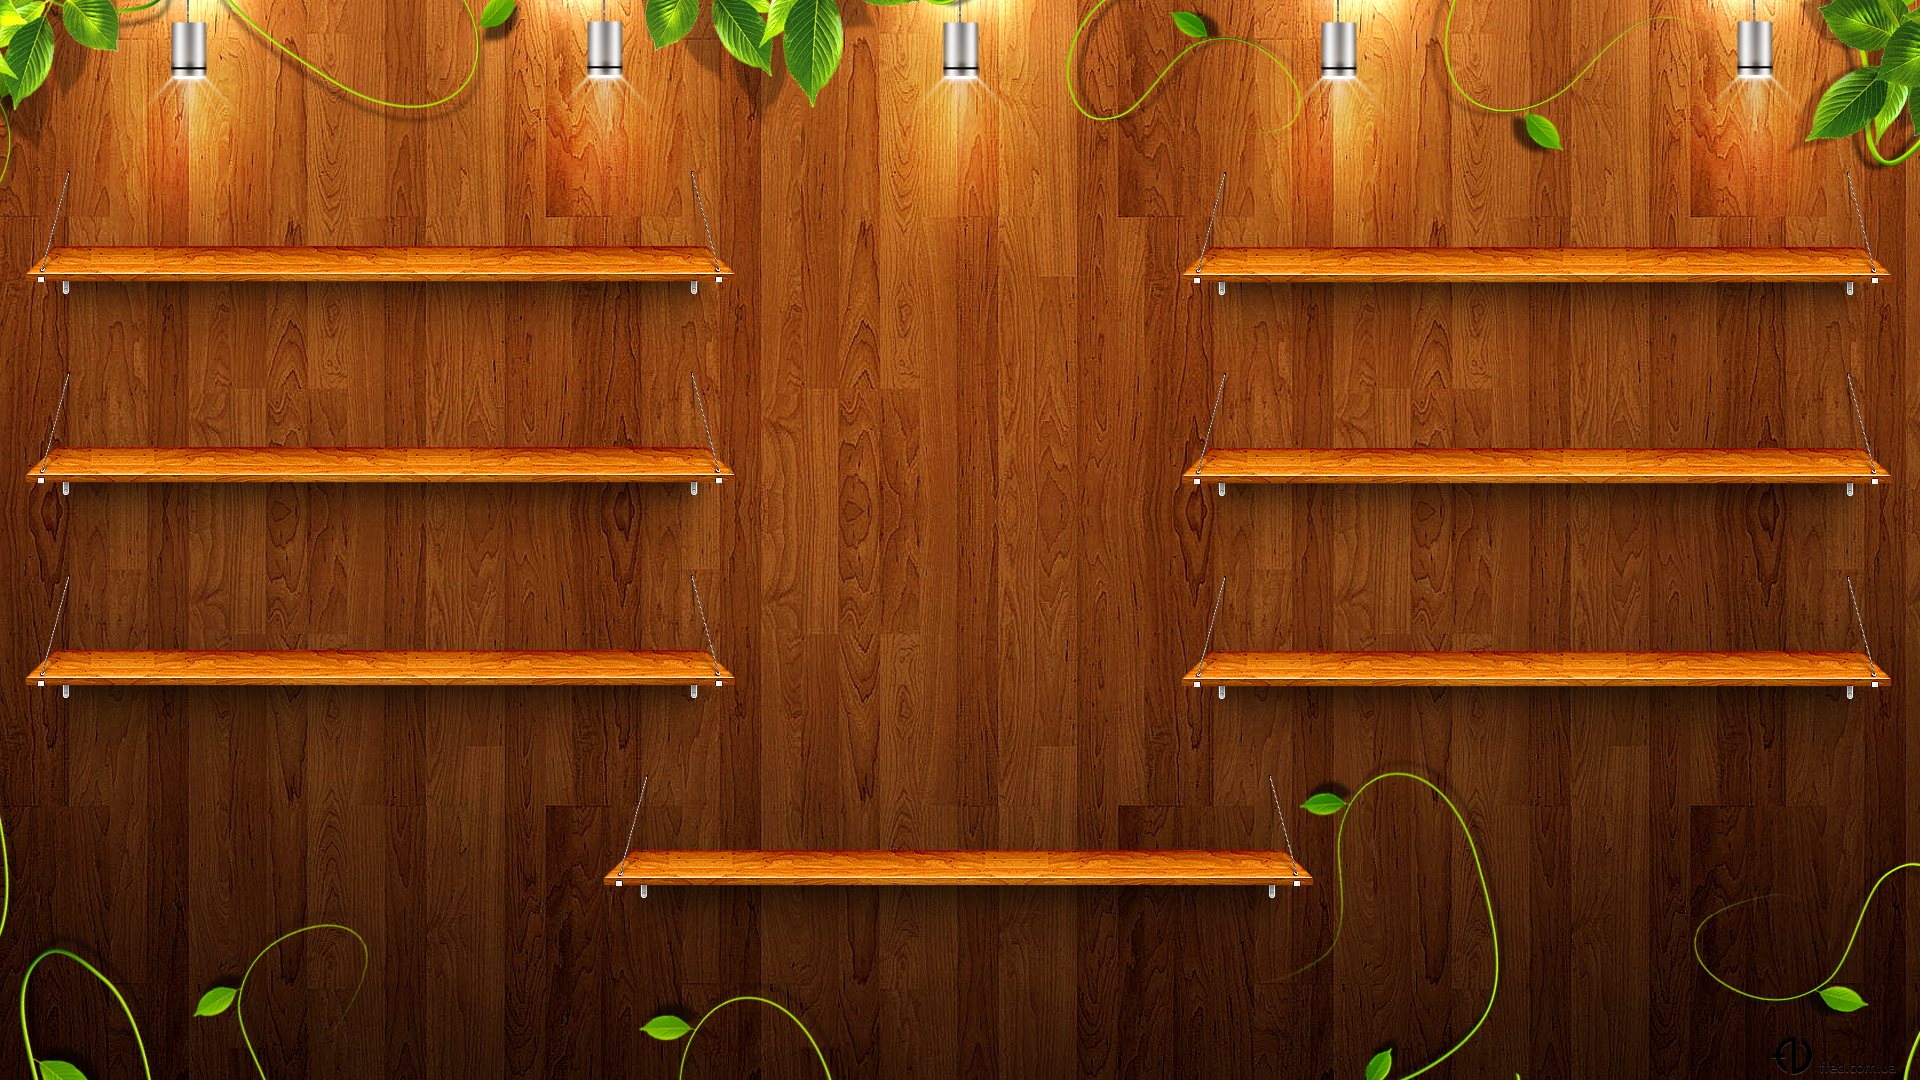 Wooden Shelves Wallpaper And Image Pictures Photos